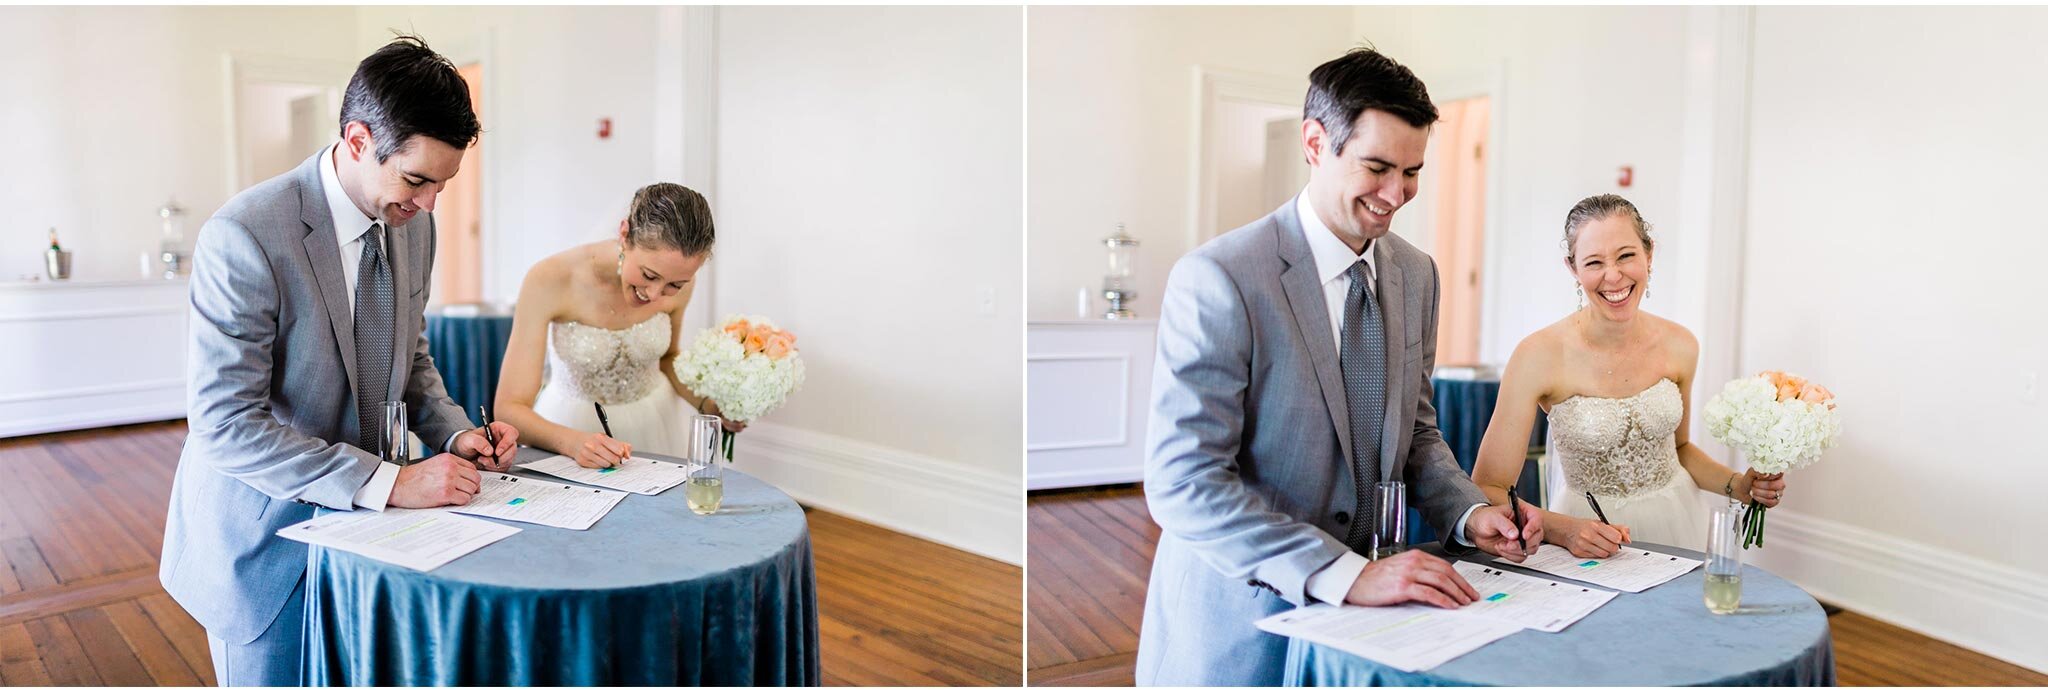 Raleigh Wedding Photographer | By G. Lin Photography | Merrimon Wynne House | Signing marriage certificate